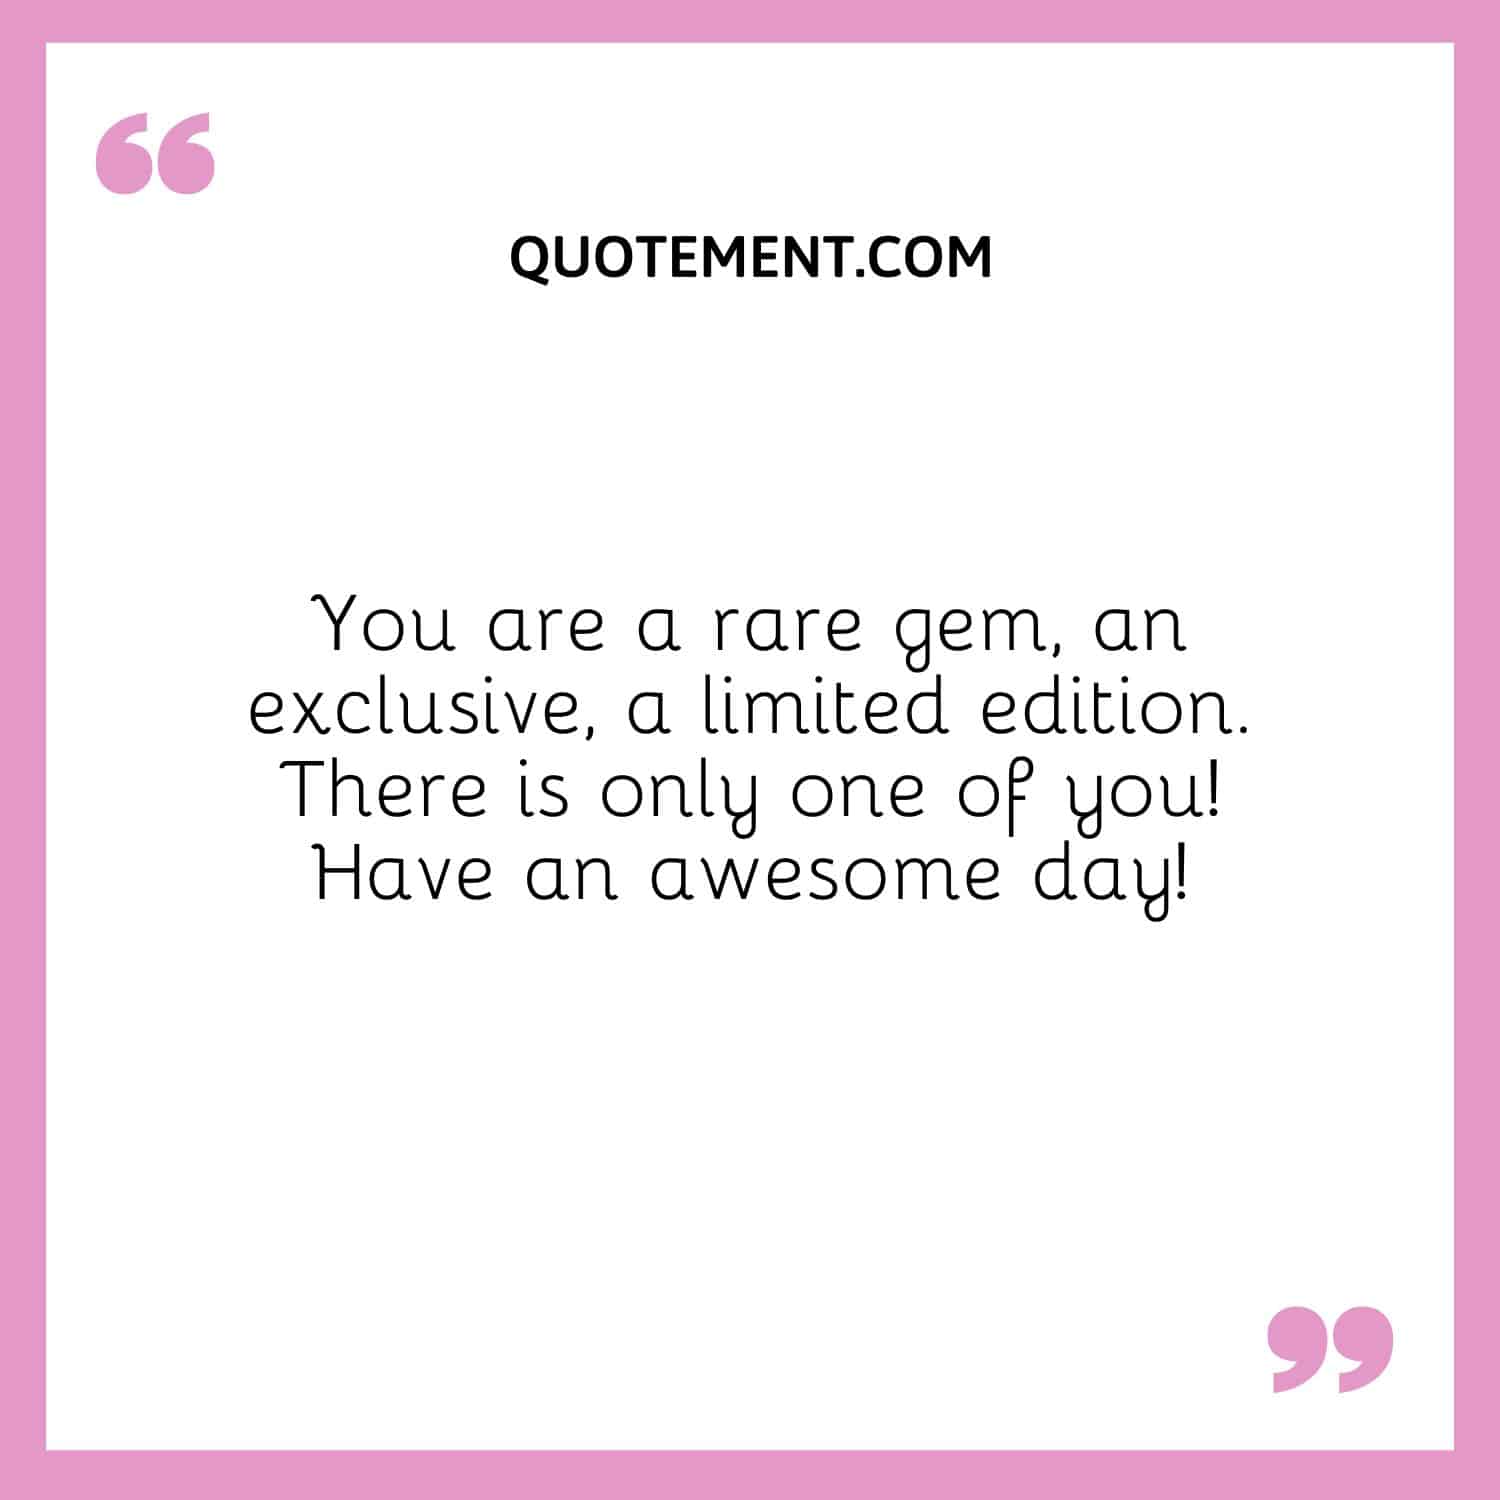 You are a rare gem, an exclusive, a limited edition. There is only one of you! Have an awesome day!